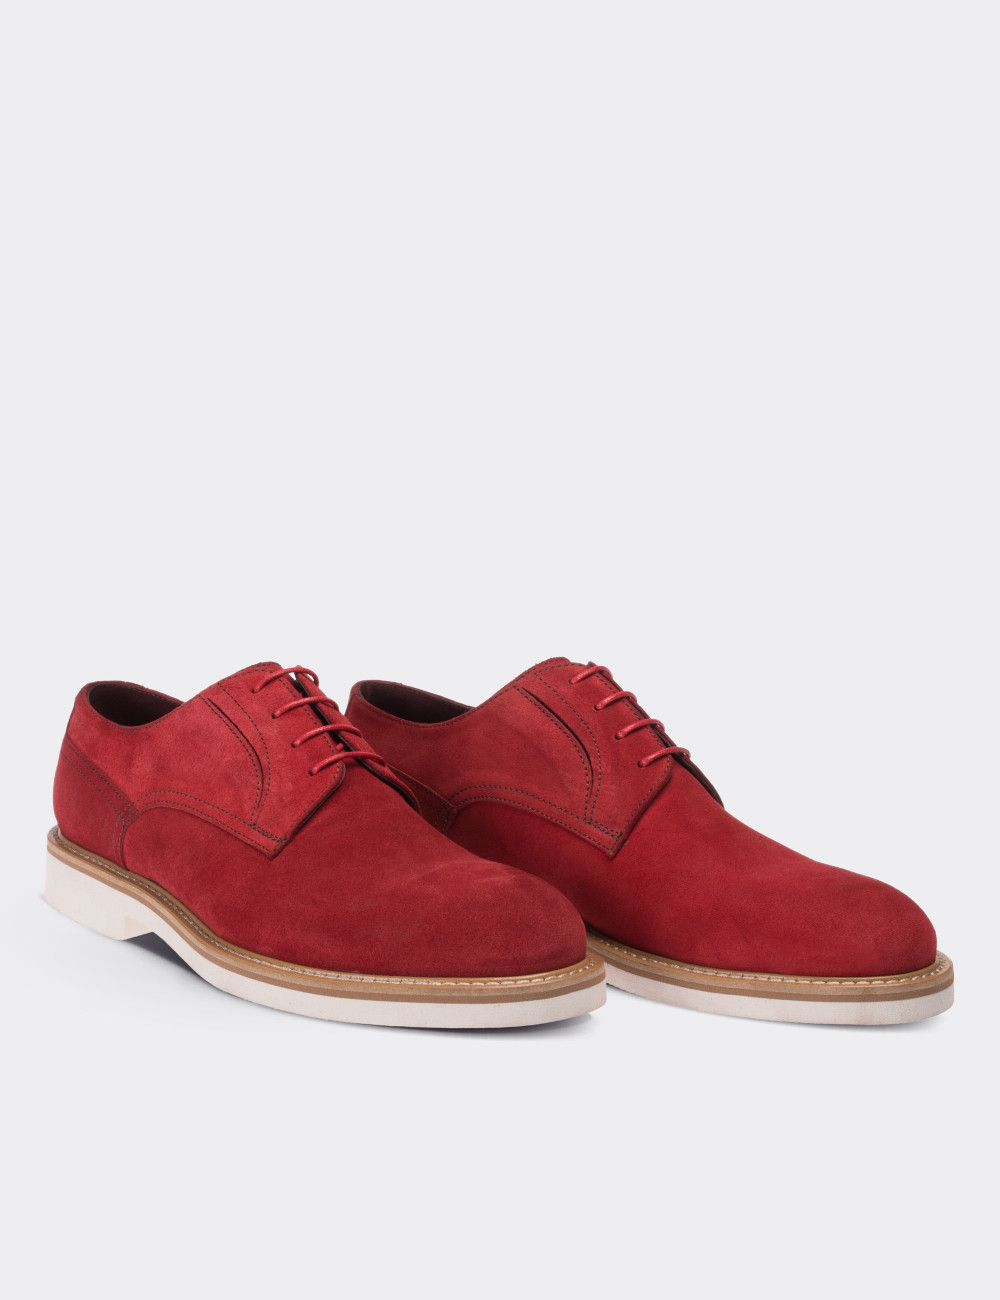 Red Suede Leather Lace-up Shoes - 01294MKRME01